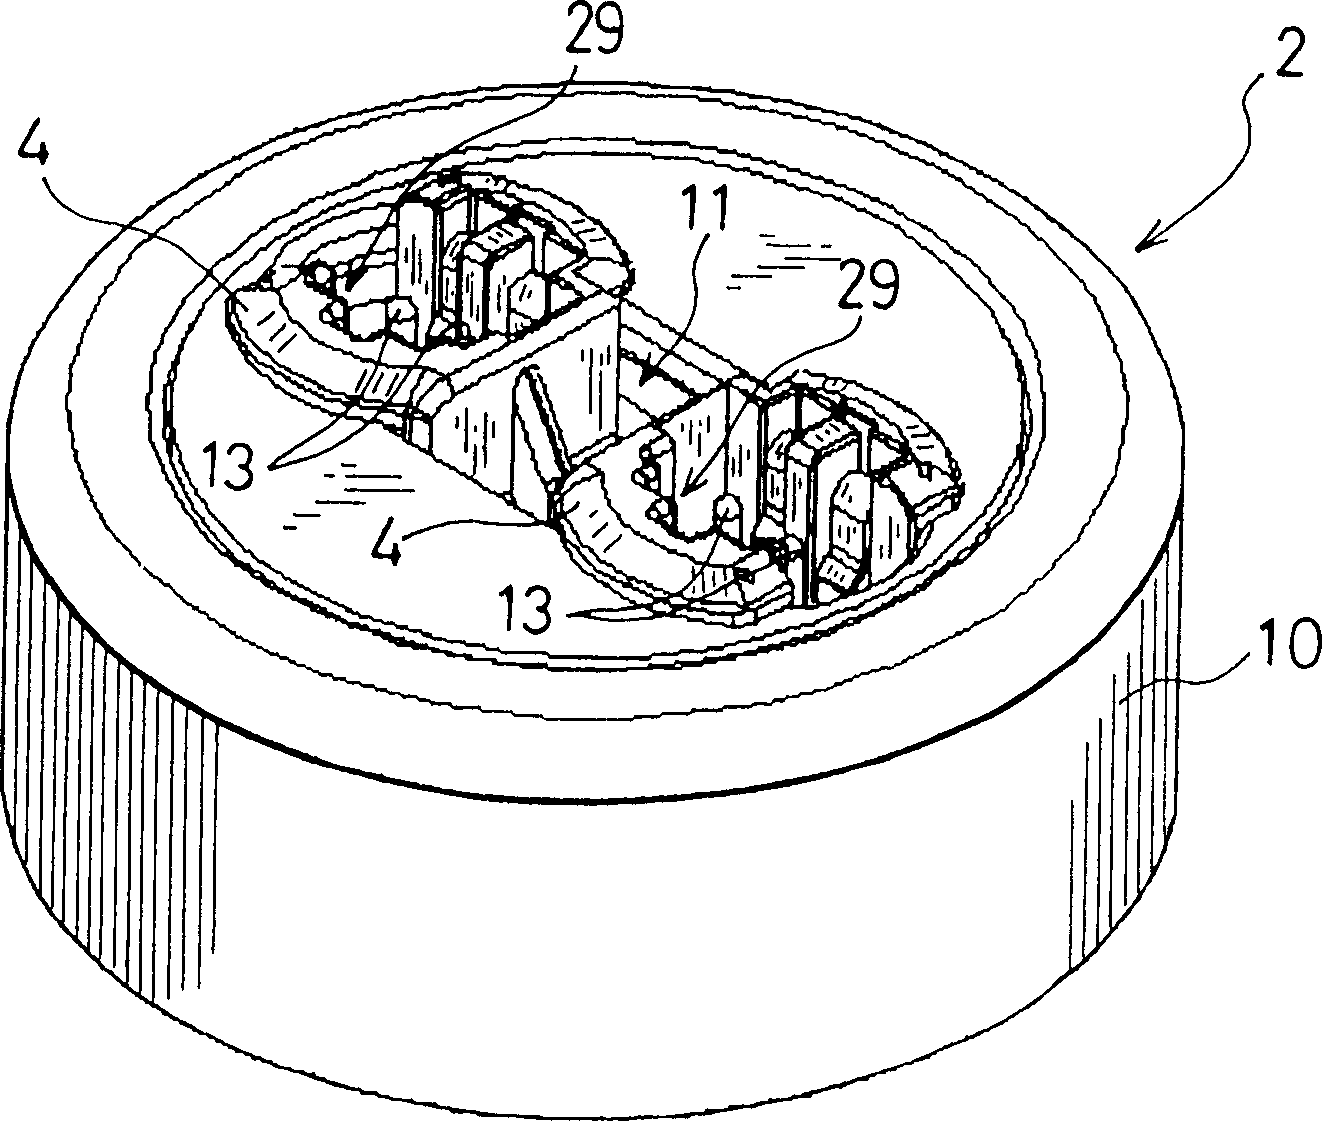 Electric connector assembly containing locking part